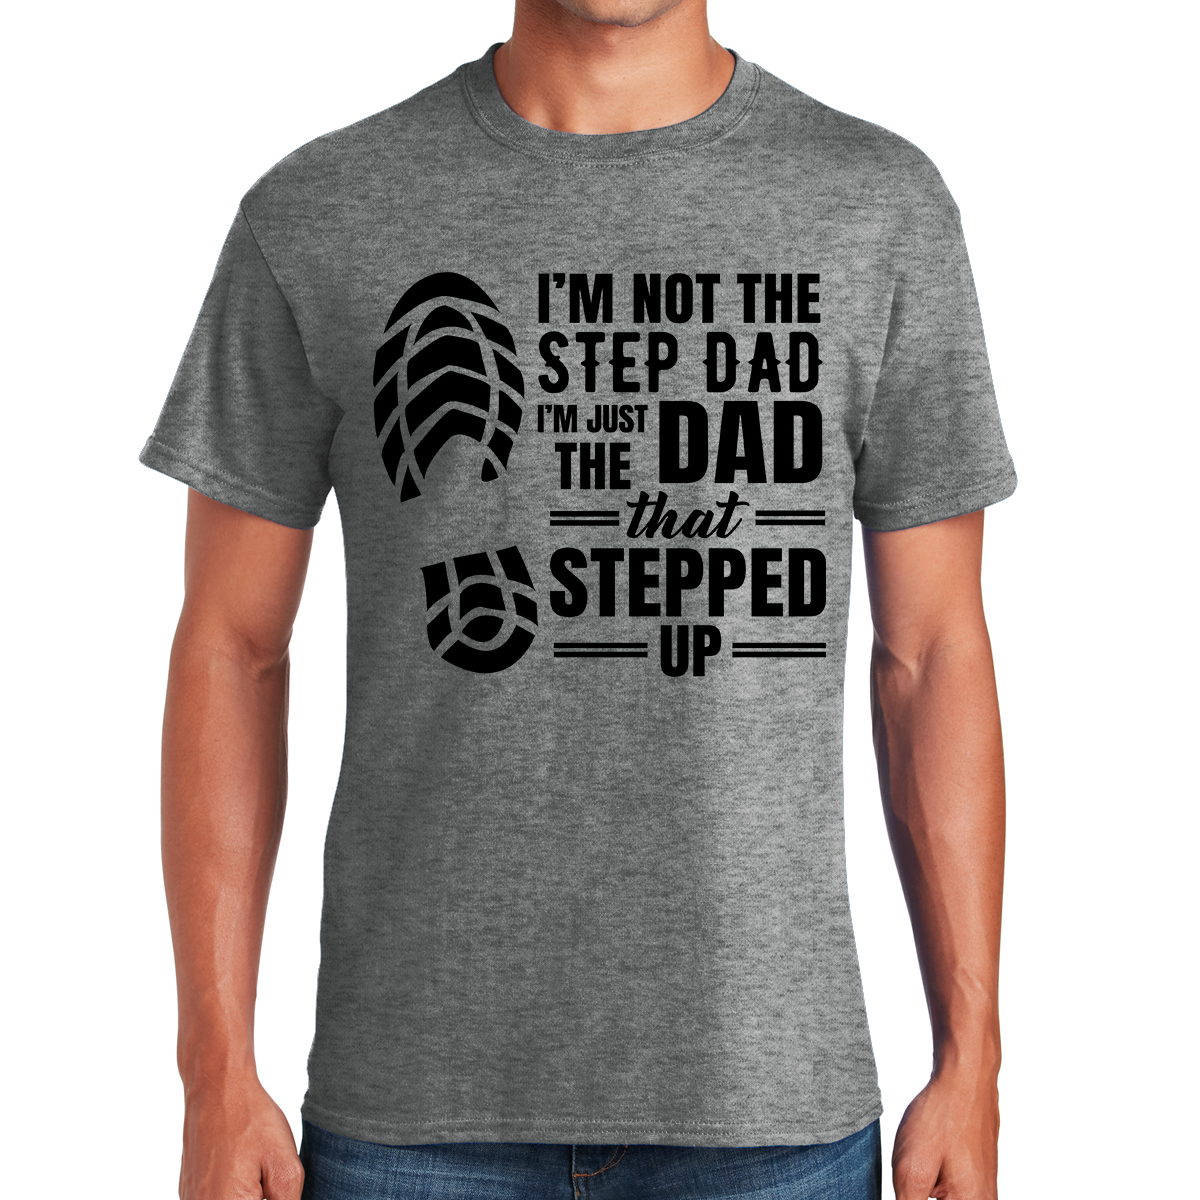 I'm Not The Step Dad I'm Just The Dad That Stepped Up Awesome Dad T-shirt